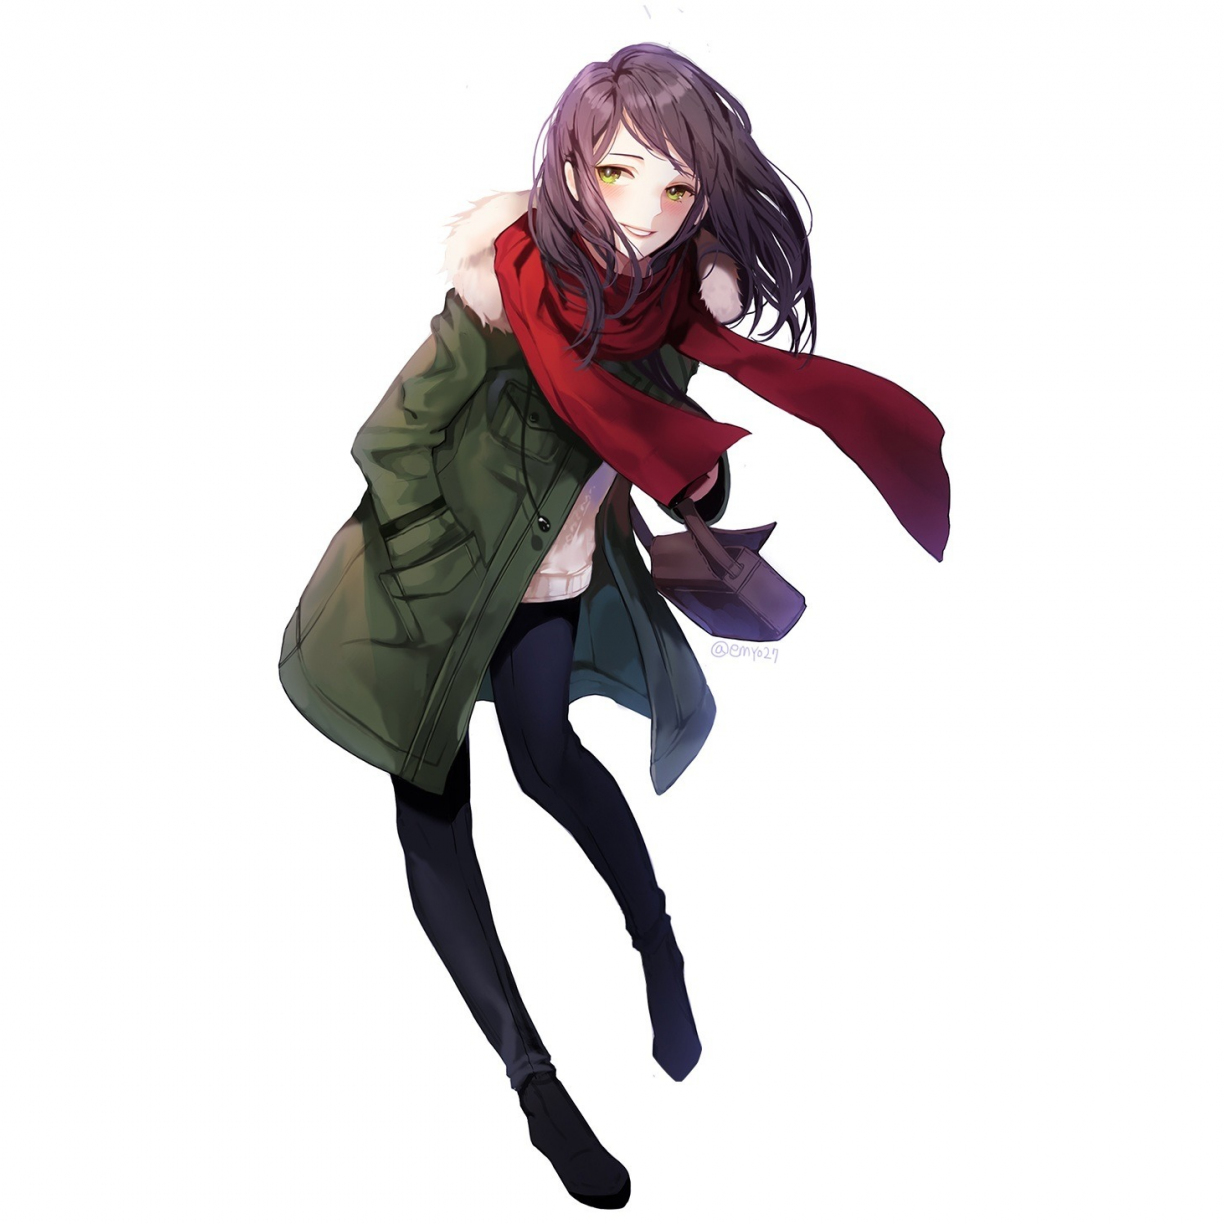 red-scarf-and-jacket-cute-anime-girl.jpg